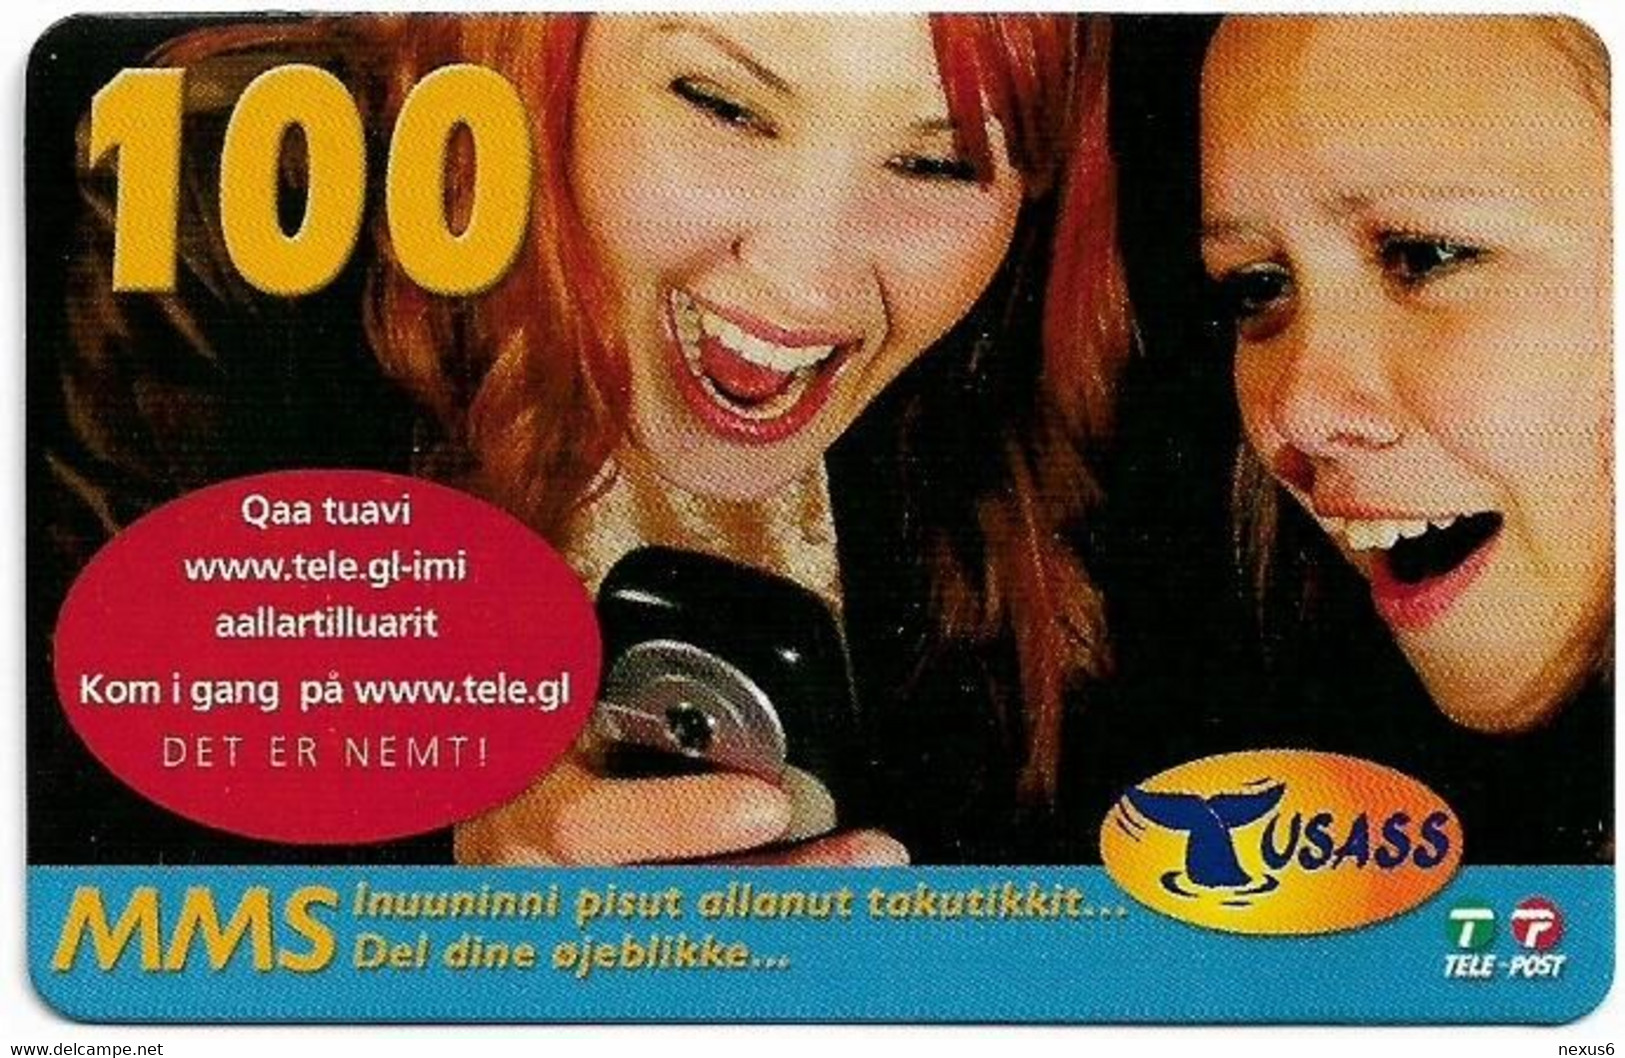 Greenland - Tusass - 2 Girls With Mobile, GSM Refill, 100kr. Exp. 17.05.2009, Used - Grönland